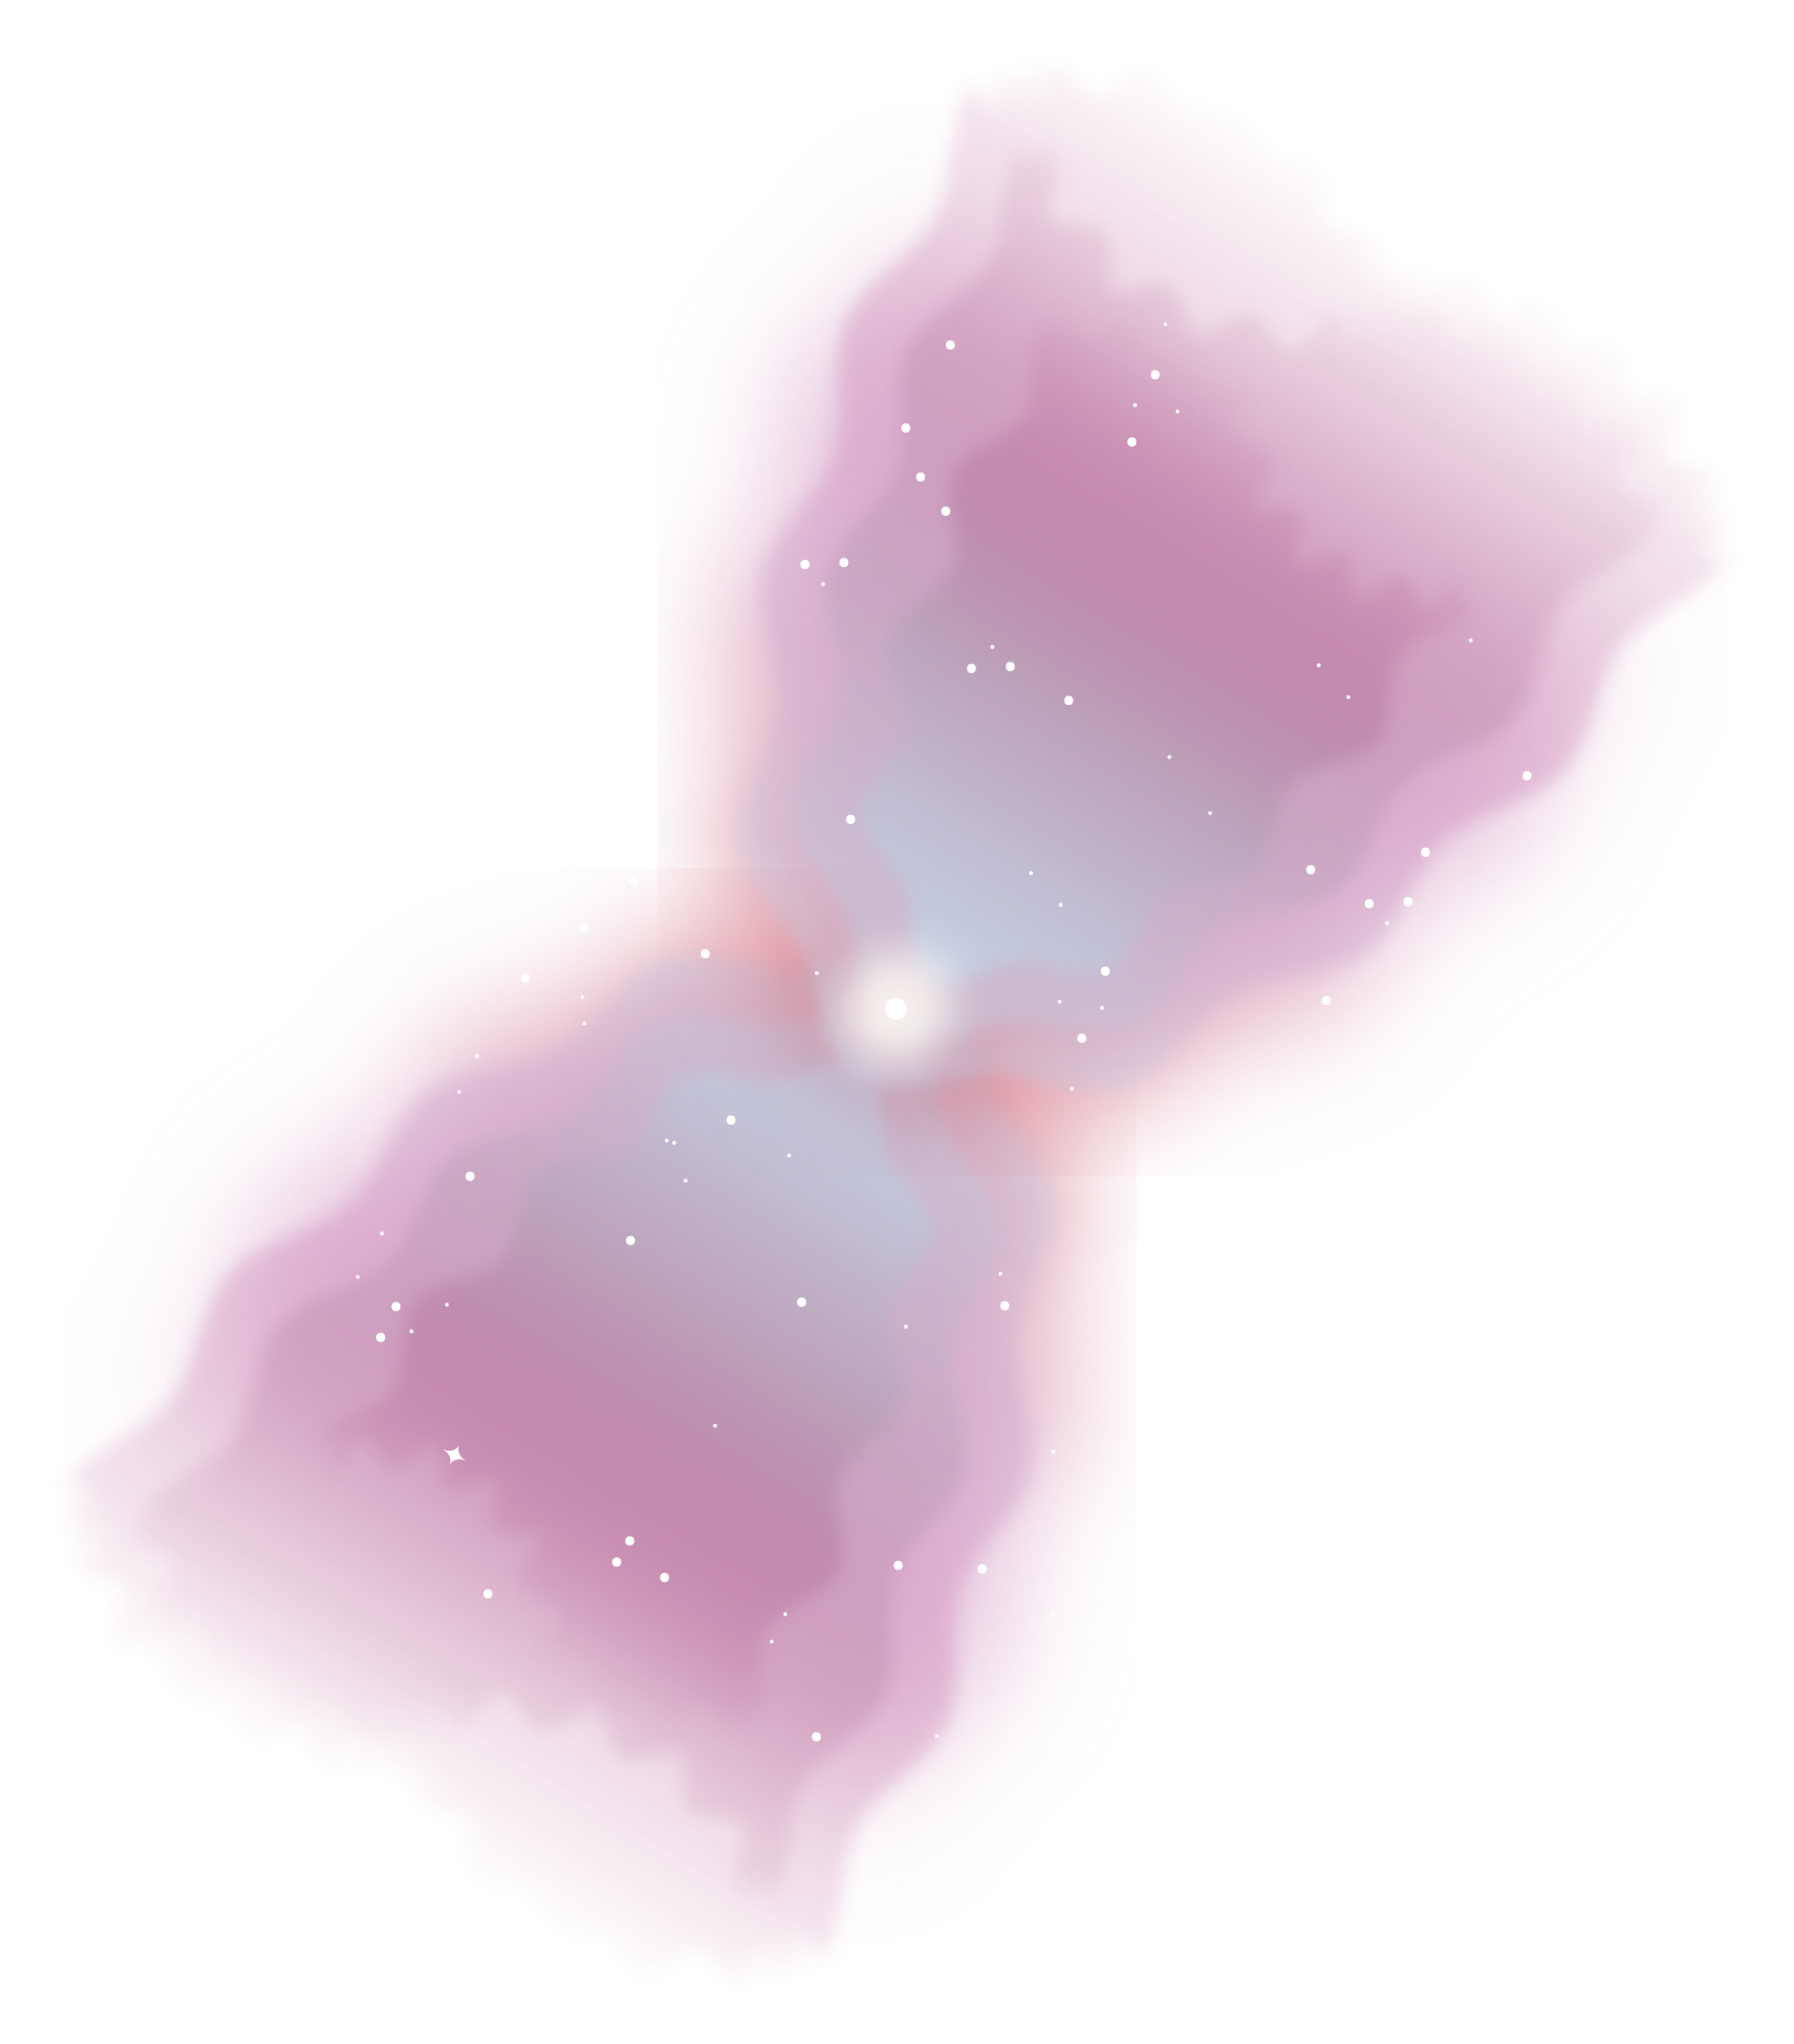 A transparent, colorful hourglass shape has a central point that is a white circle surrounded by bright, light haze. Extending out from the center in opposite directions are plumes of color that form  the hourglass shape. Each  starts as blue near the central circle, then fades into a purplish pink color. The outline of the hourglass shape is wavy and white dots representing stars speckle the image.